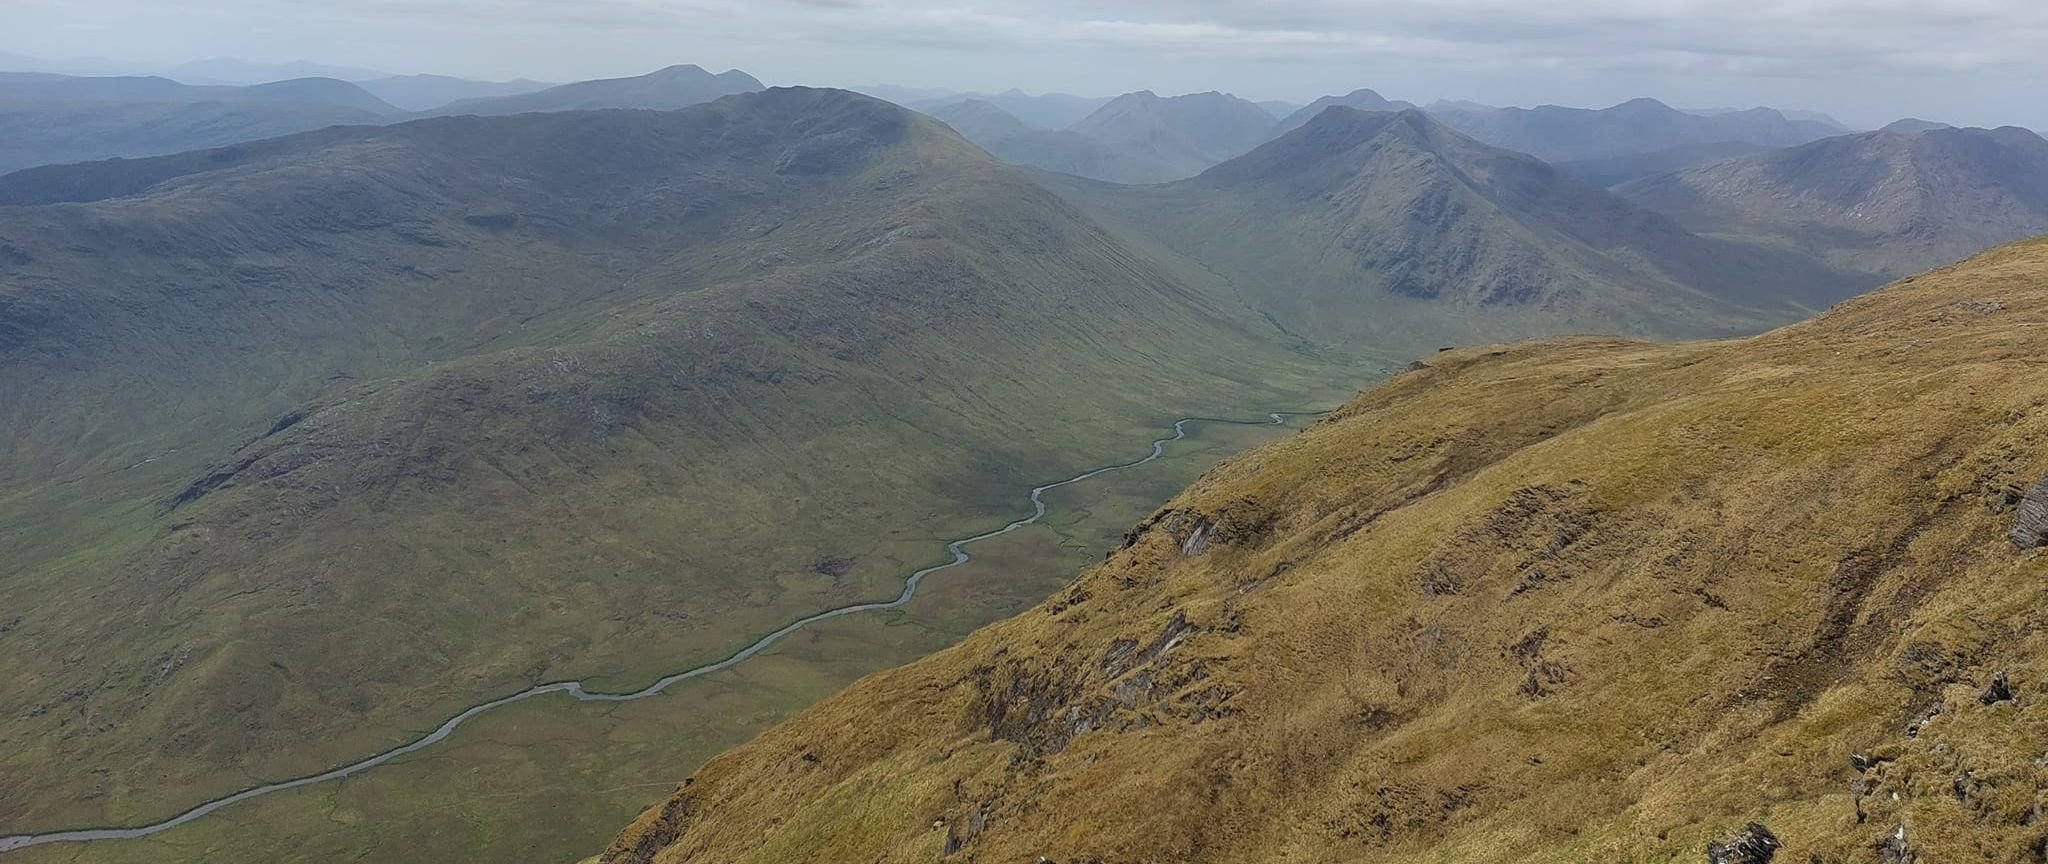 Hills of Knoydart to the south of Gairich